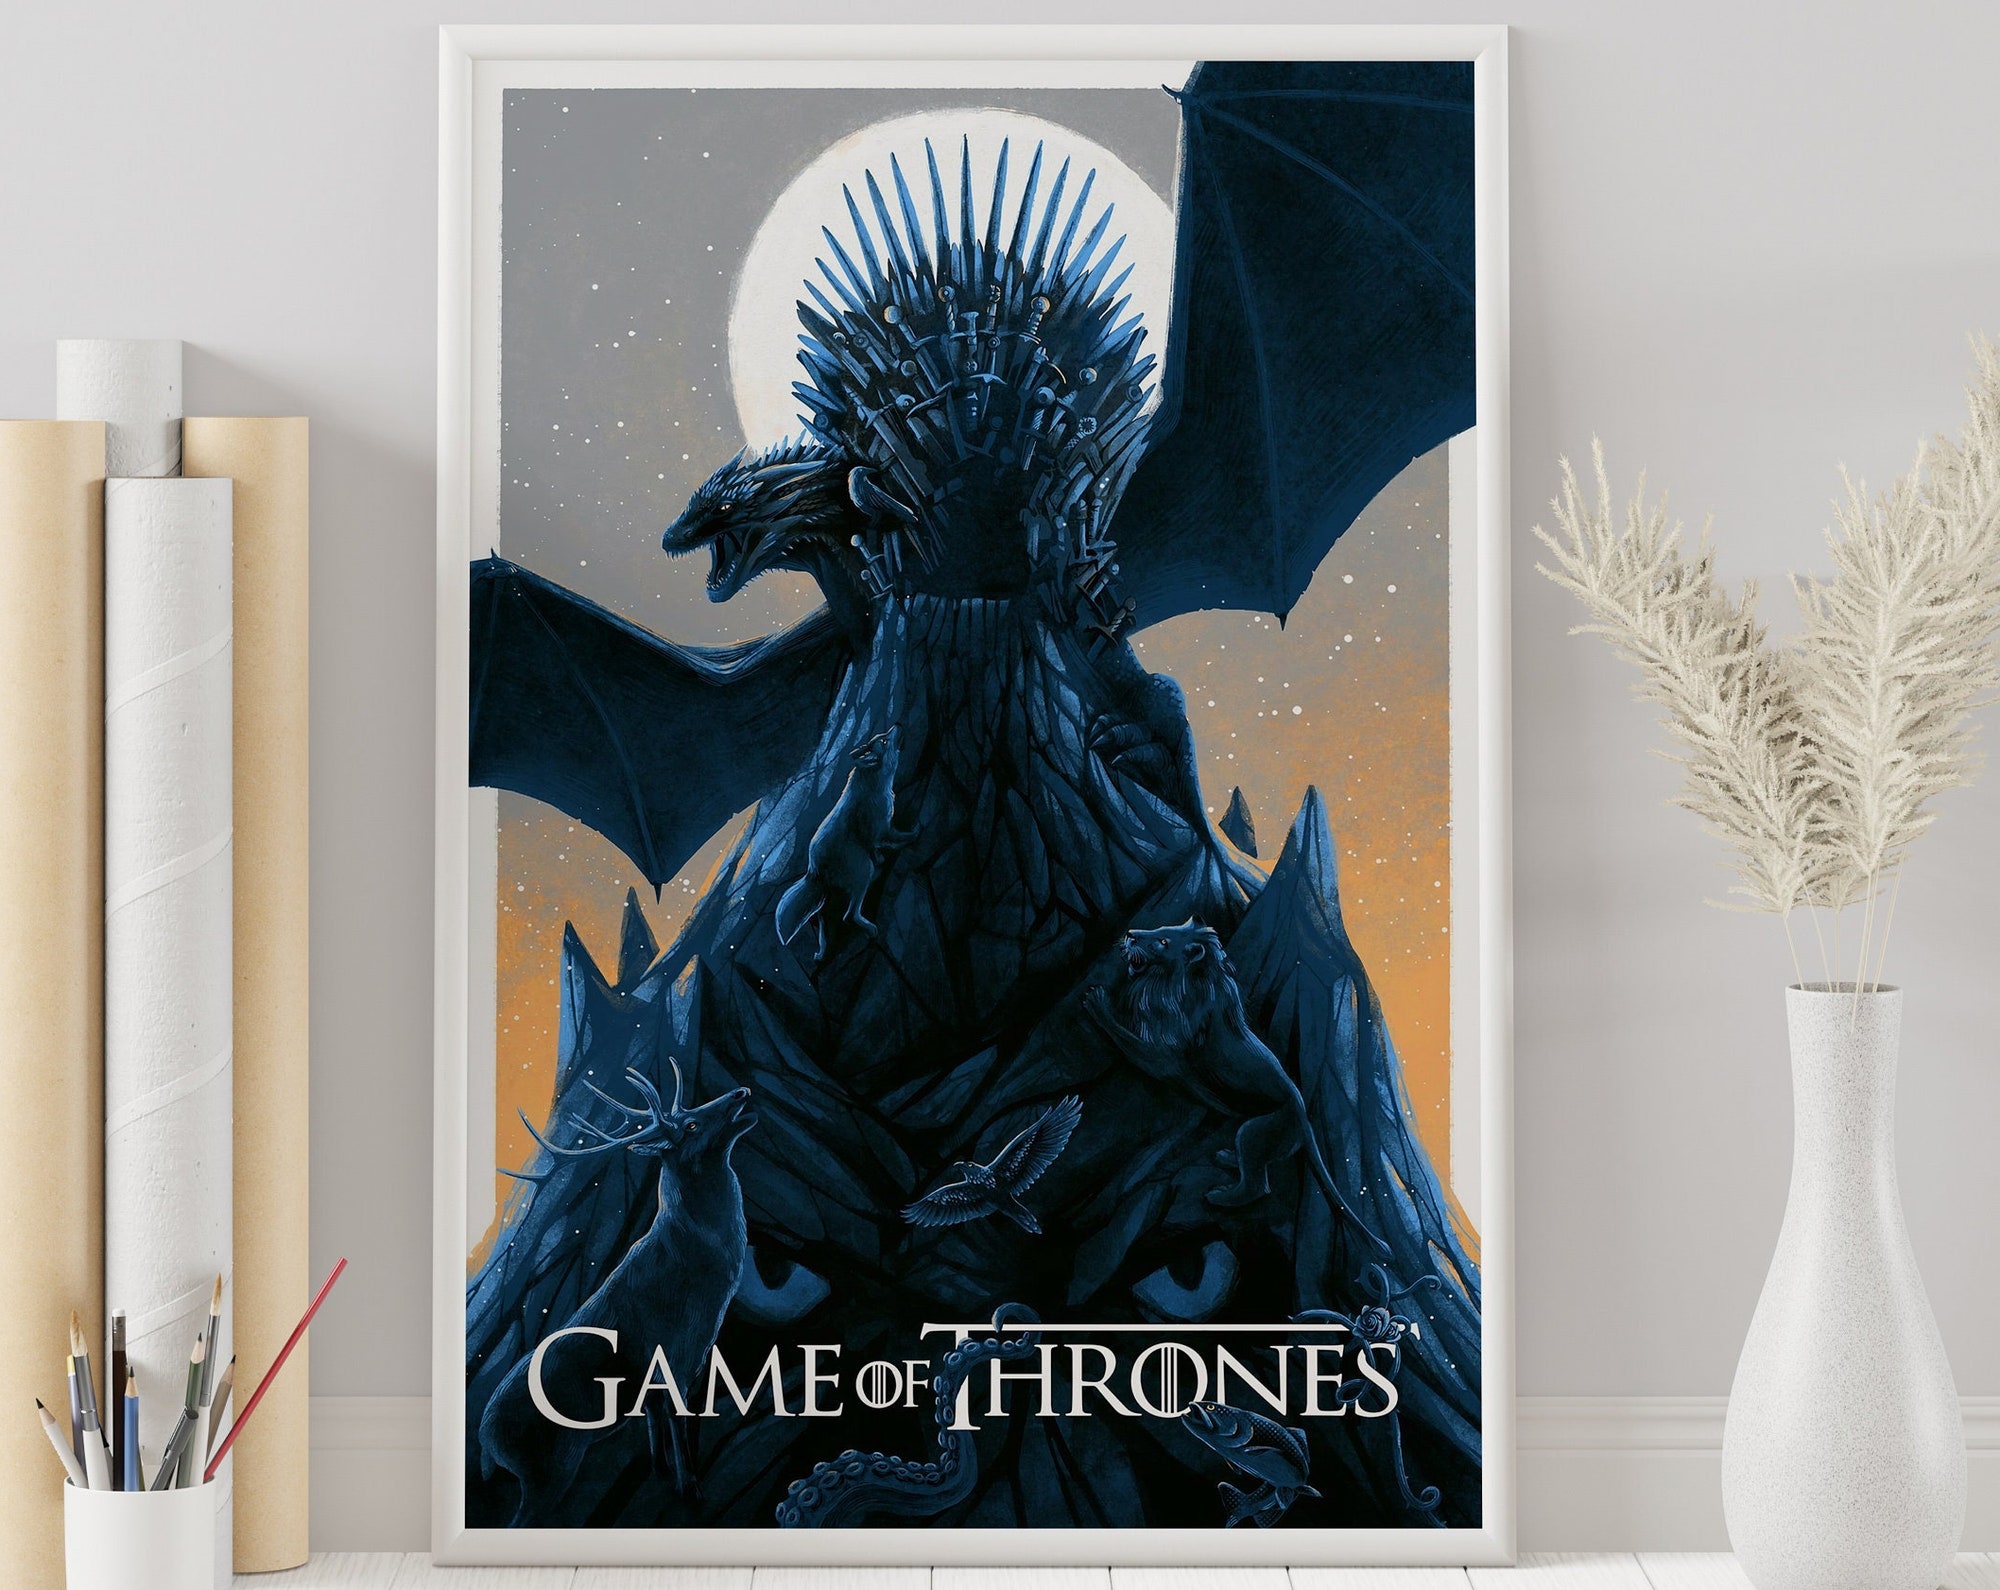 Discover Game Of Thrones Poster - George R. R. Martin - Game of Thrones - Vintage Retro Poster